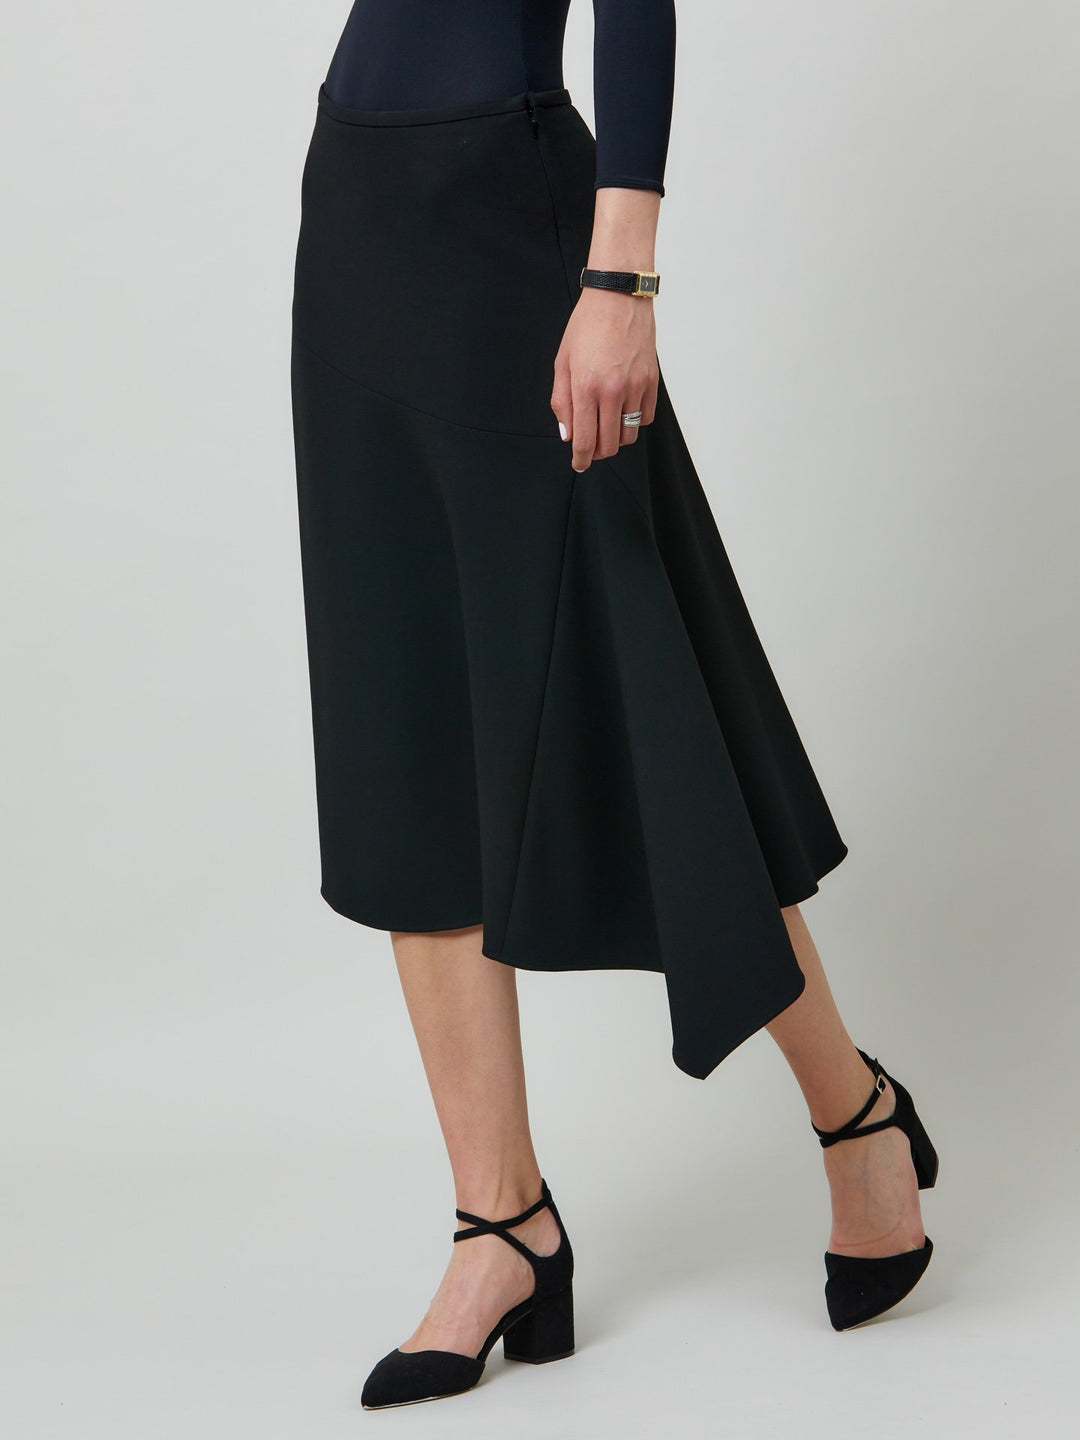 Maddison, an everyday hero! This flattering piece falls below the kn ee with an asymmetric hem. Sophisticated city style in fail-safe black. for a chic everyday look style with your favourite black boots or dress up at night with heels.